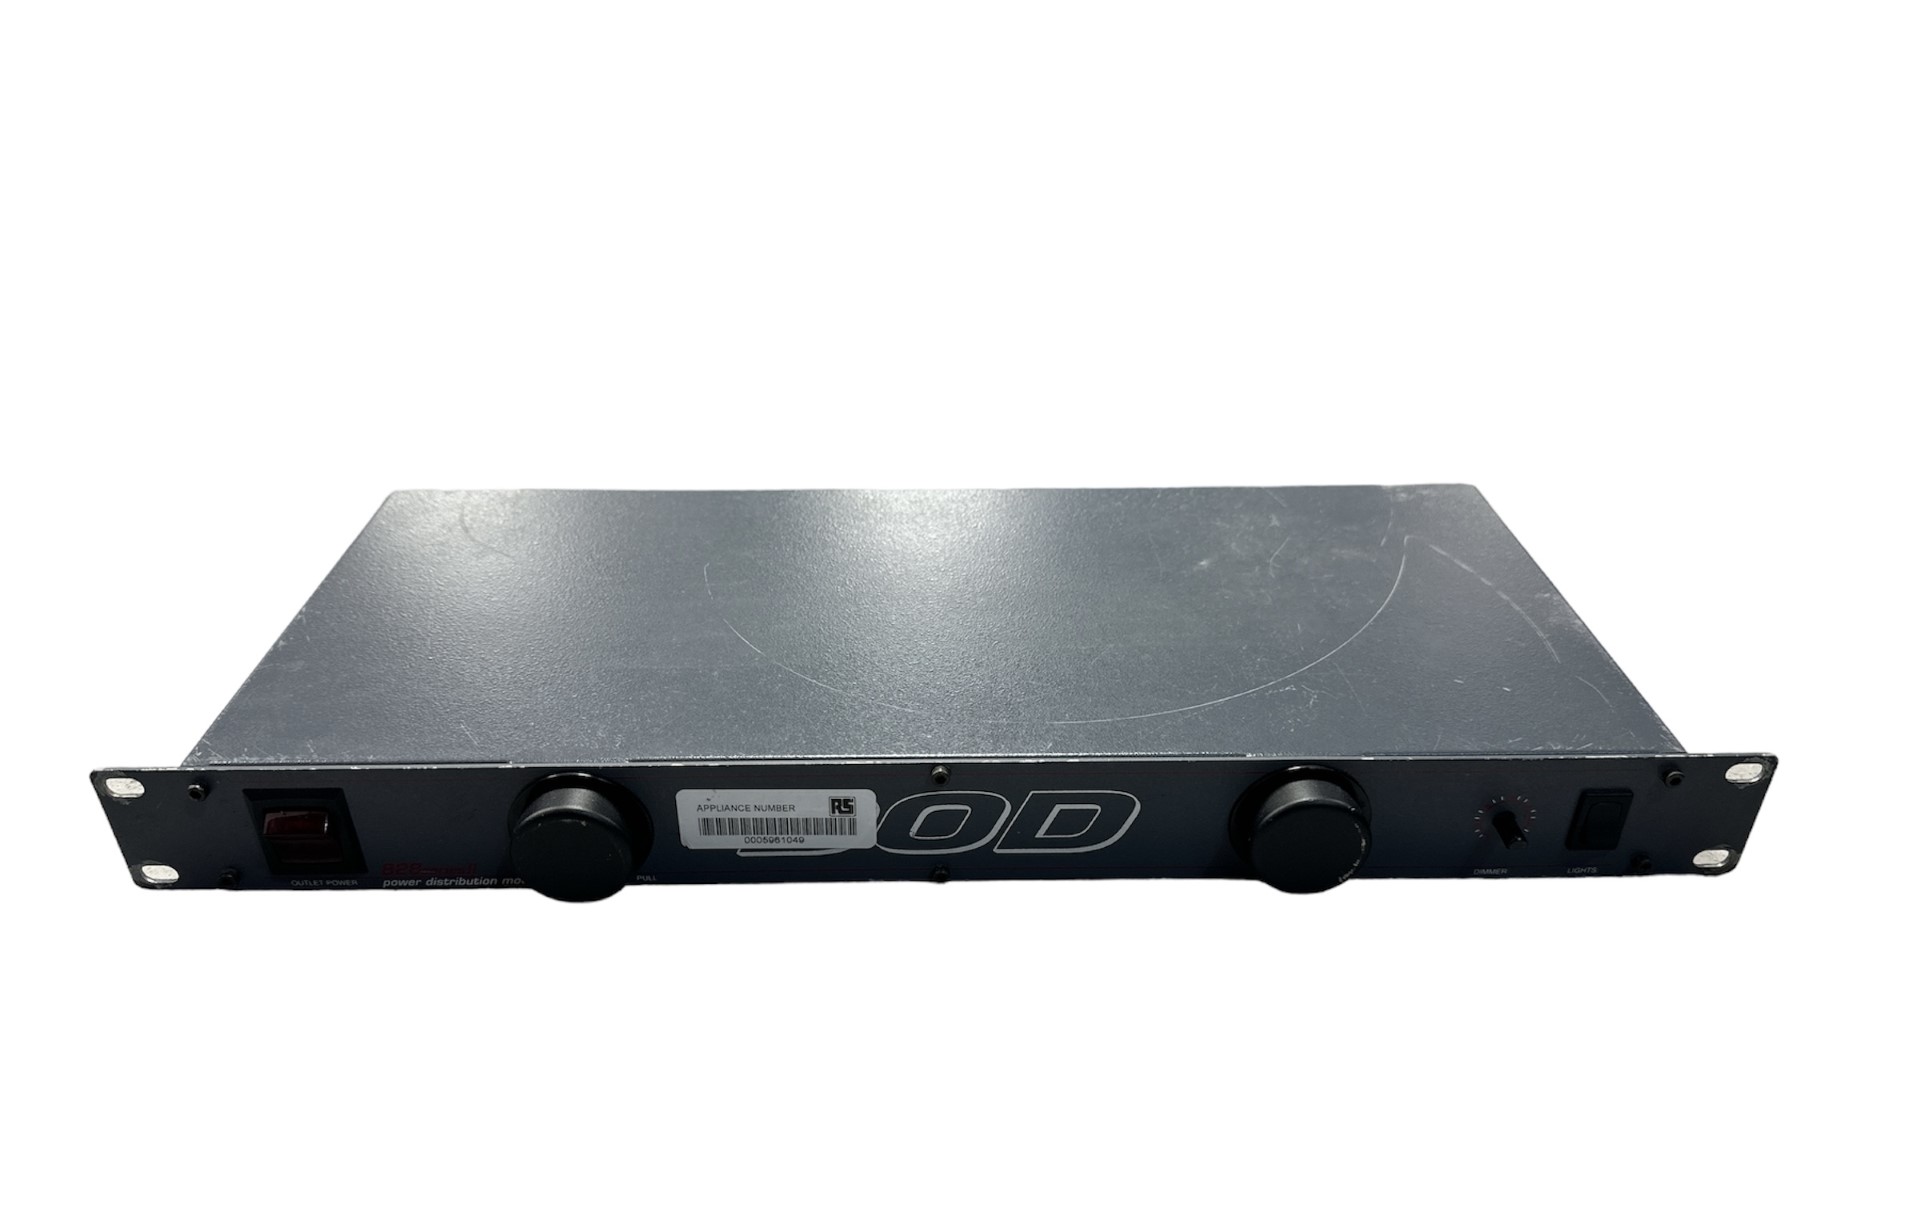 DOD Power Conditioner 828 Series II Unboxed